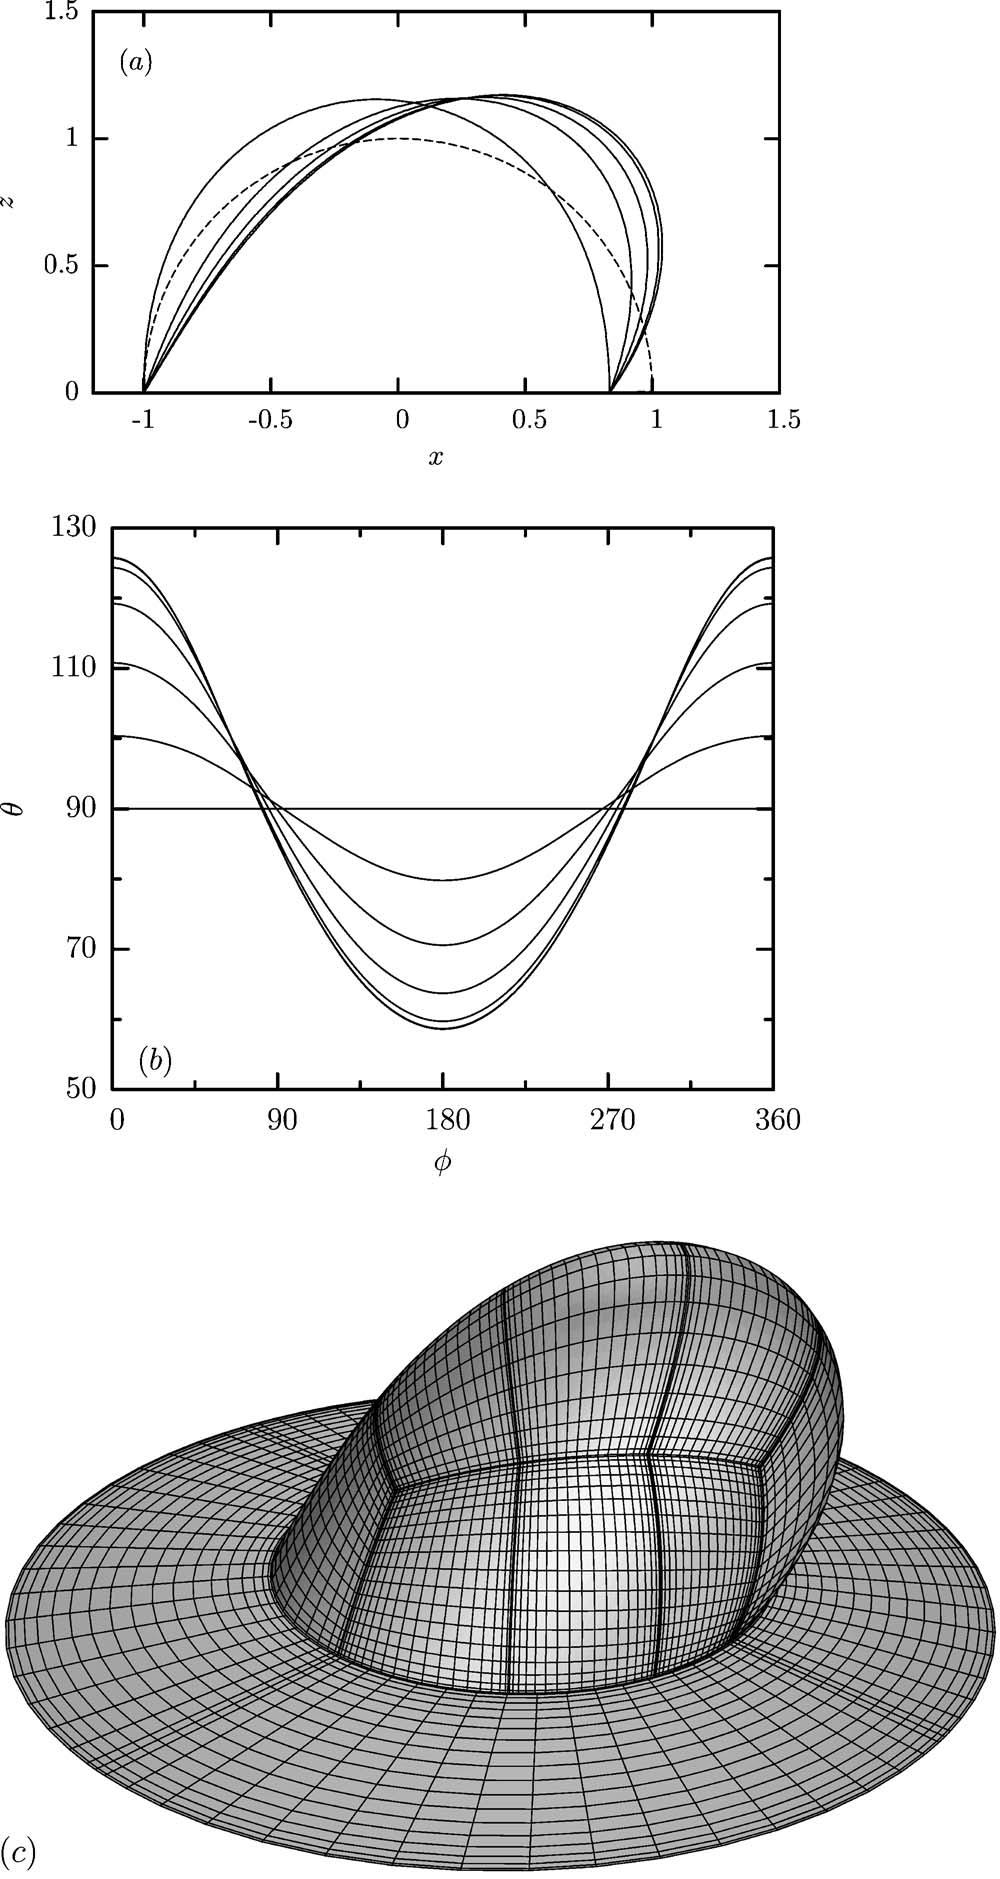 122105-5 Gravitational effects on the deformation of a droplet Phys. Fluids 19, 122105 2007 FIG. 3. Deformation of an adherent droplet with =1 and 0 =90 in simple shear flow with Ca=0.